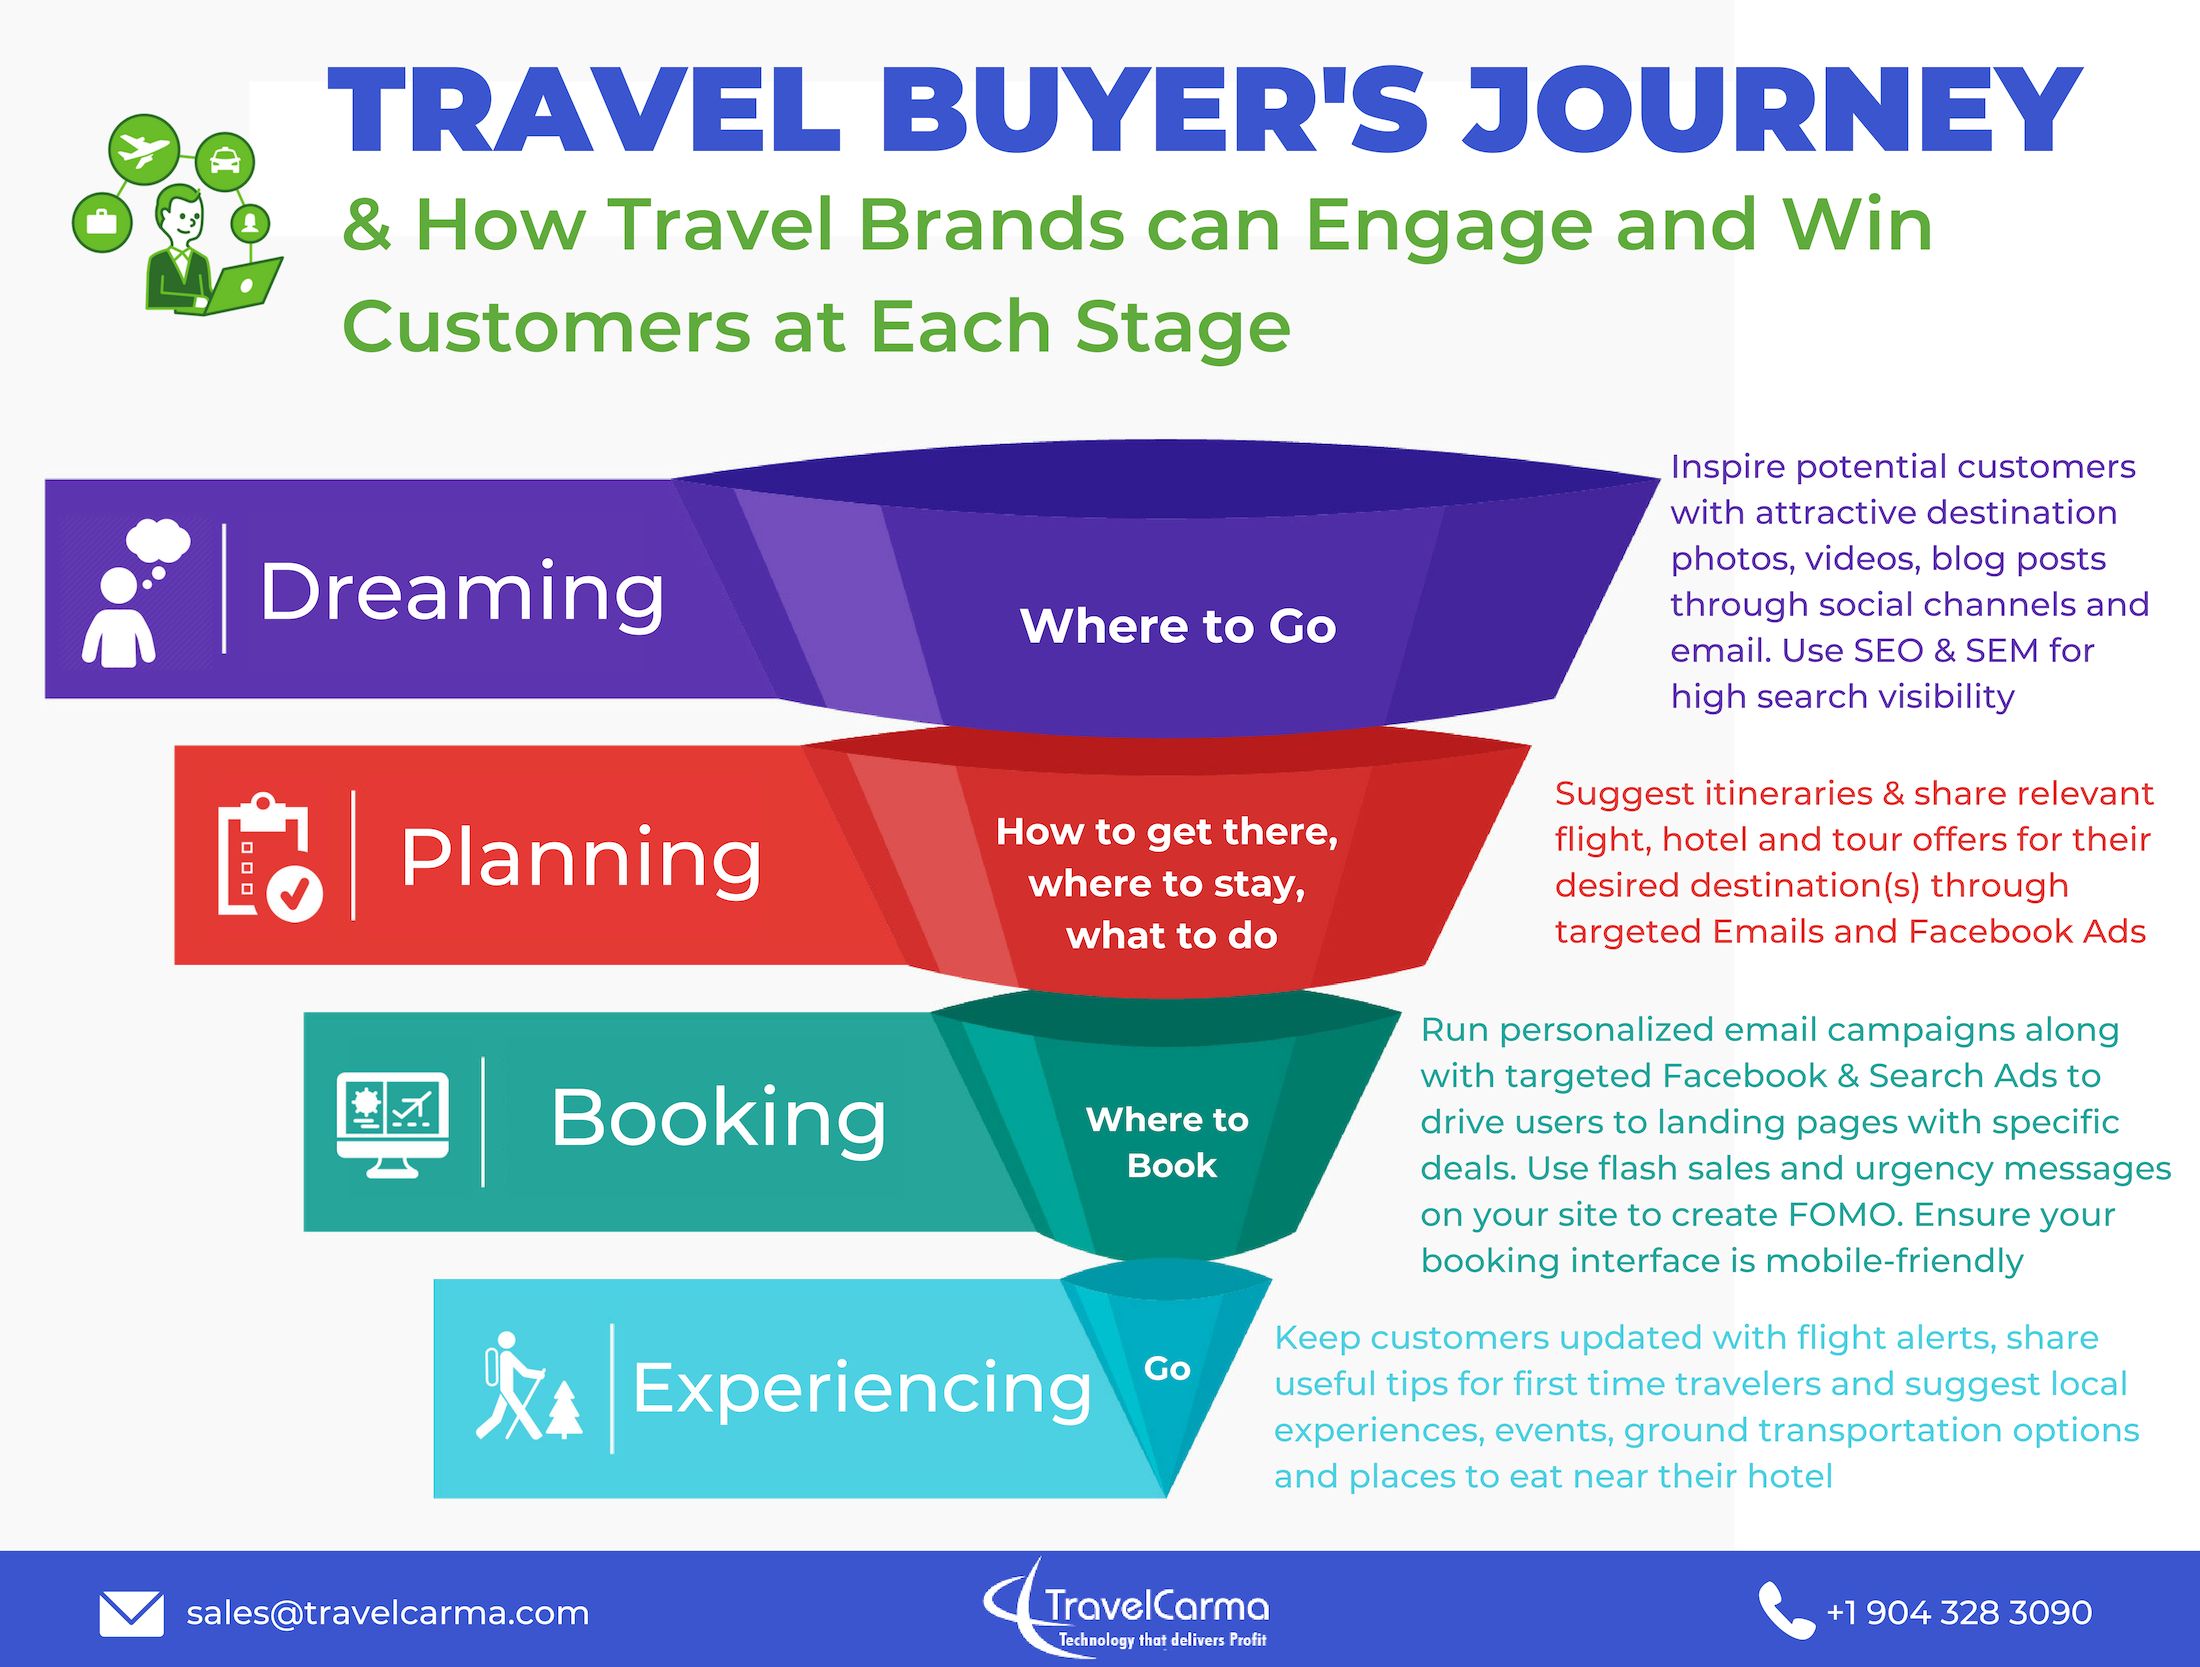 Travel Buyer Journey - How to engage customers at each stage